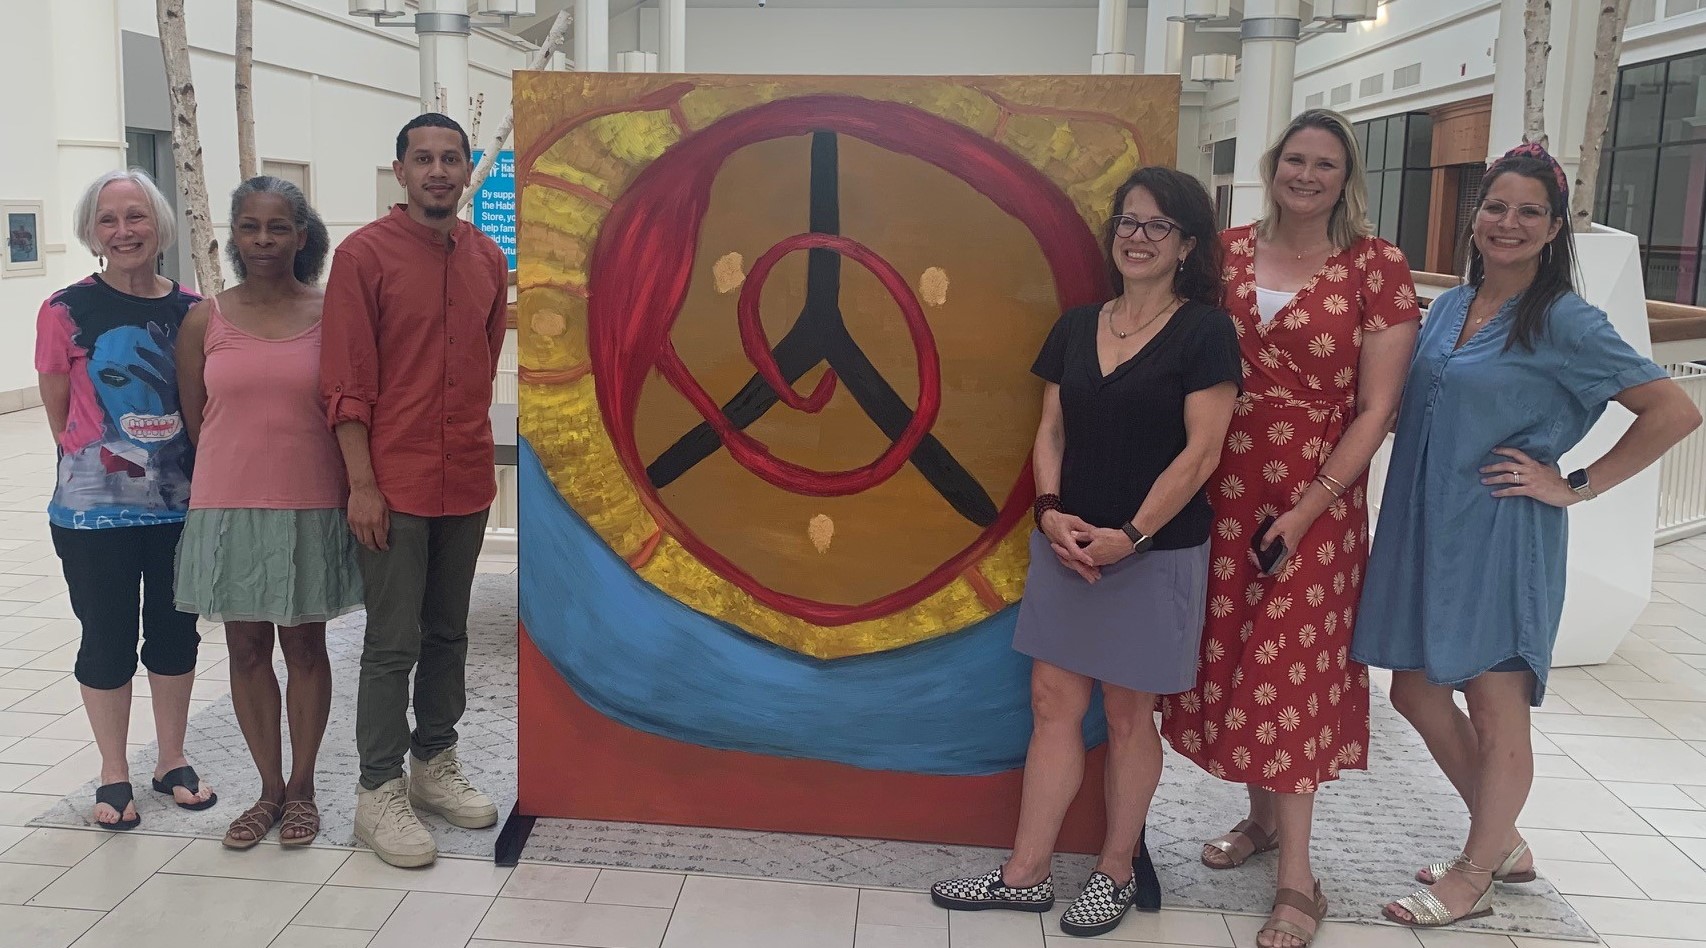 Piece of art with circular design and brown blue yellow red and black colors, with 6 people standing around it